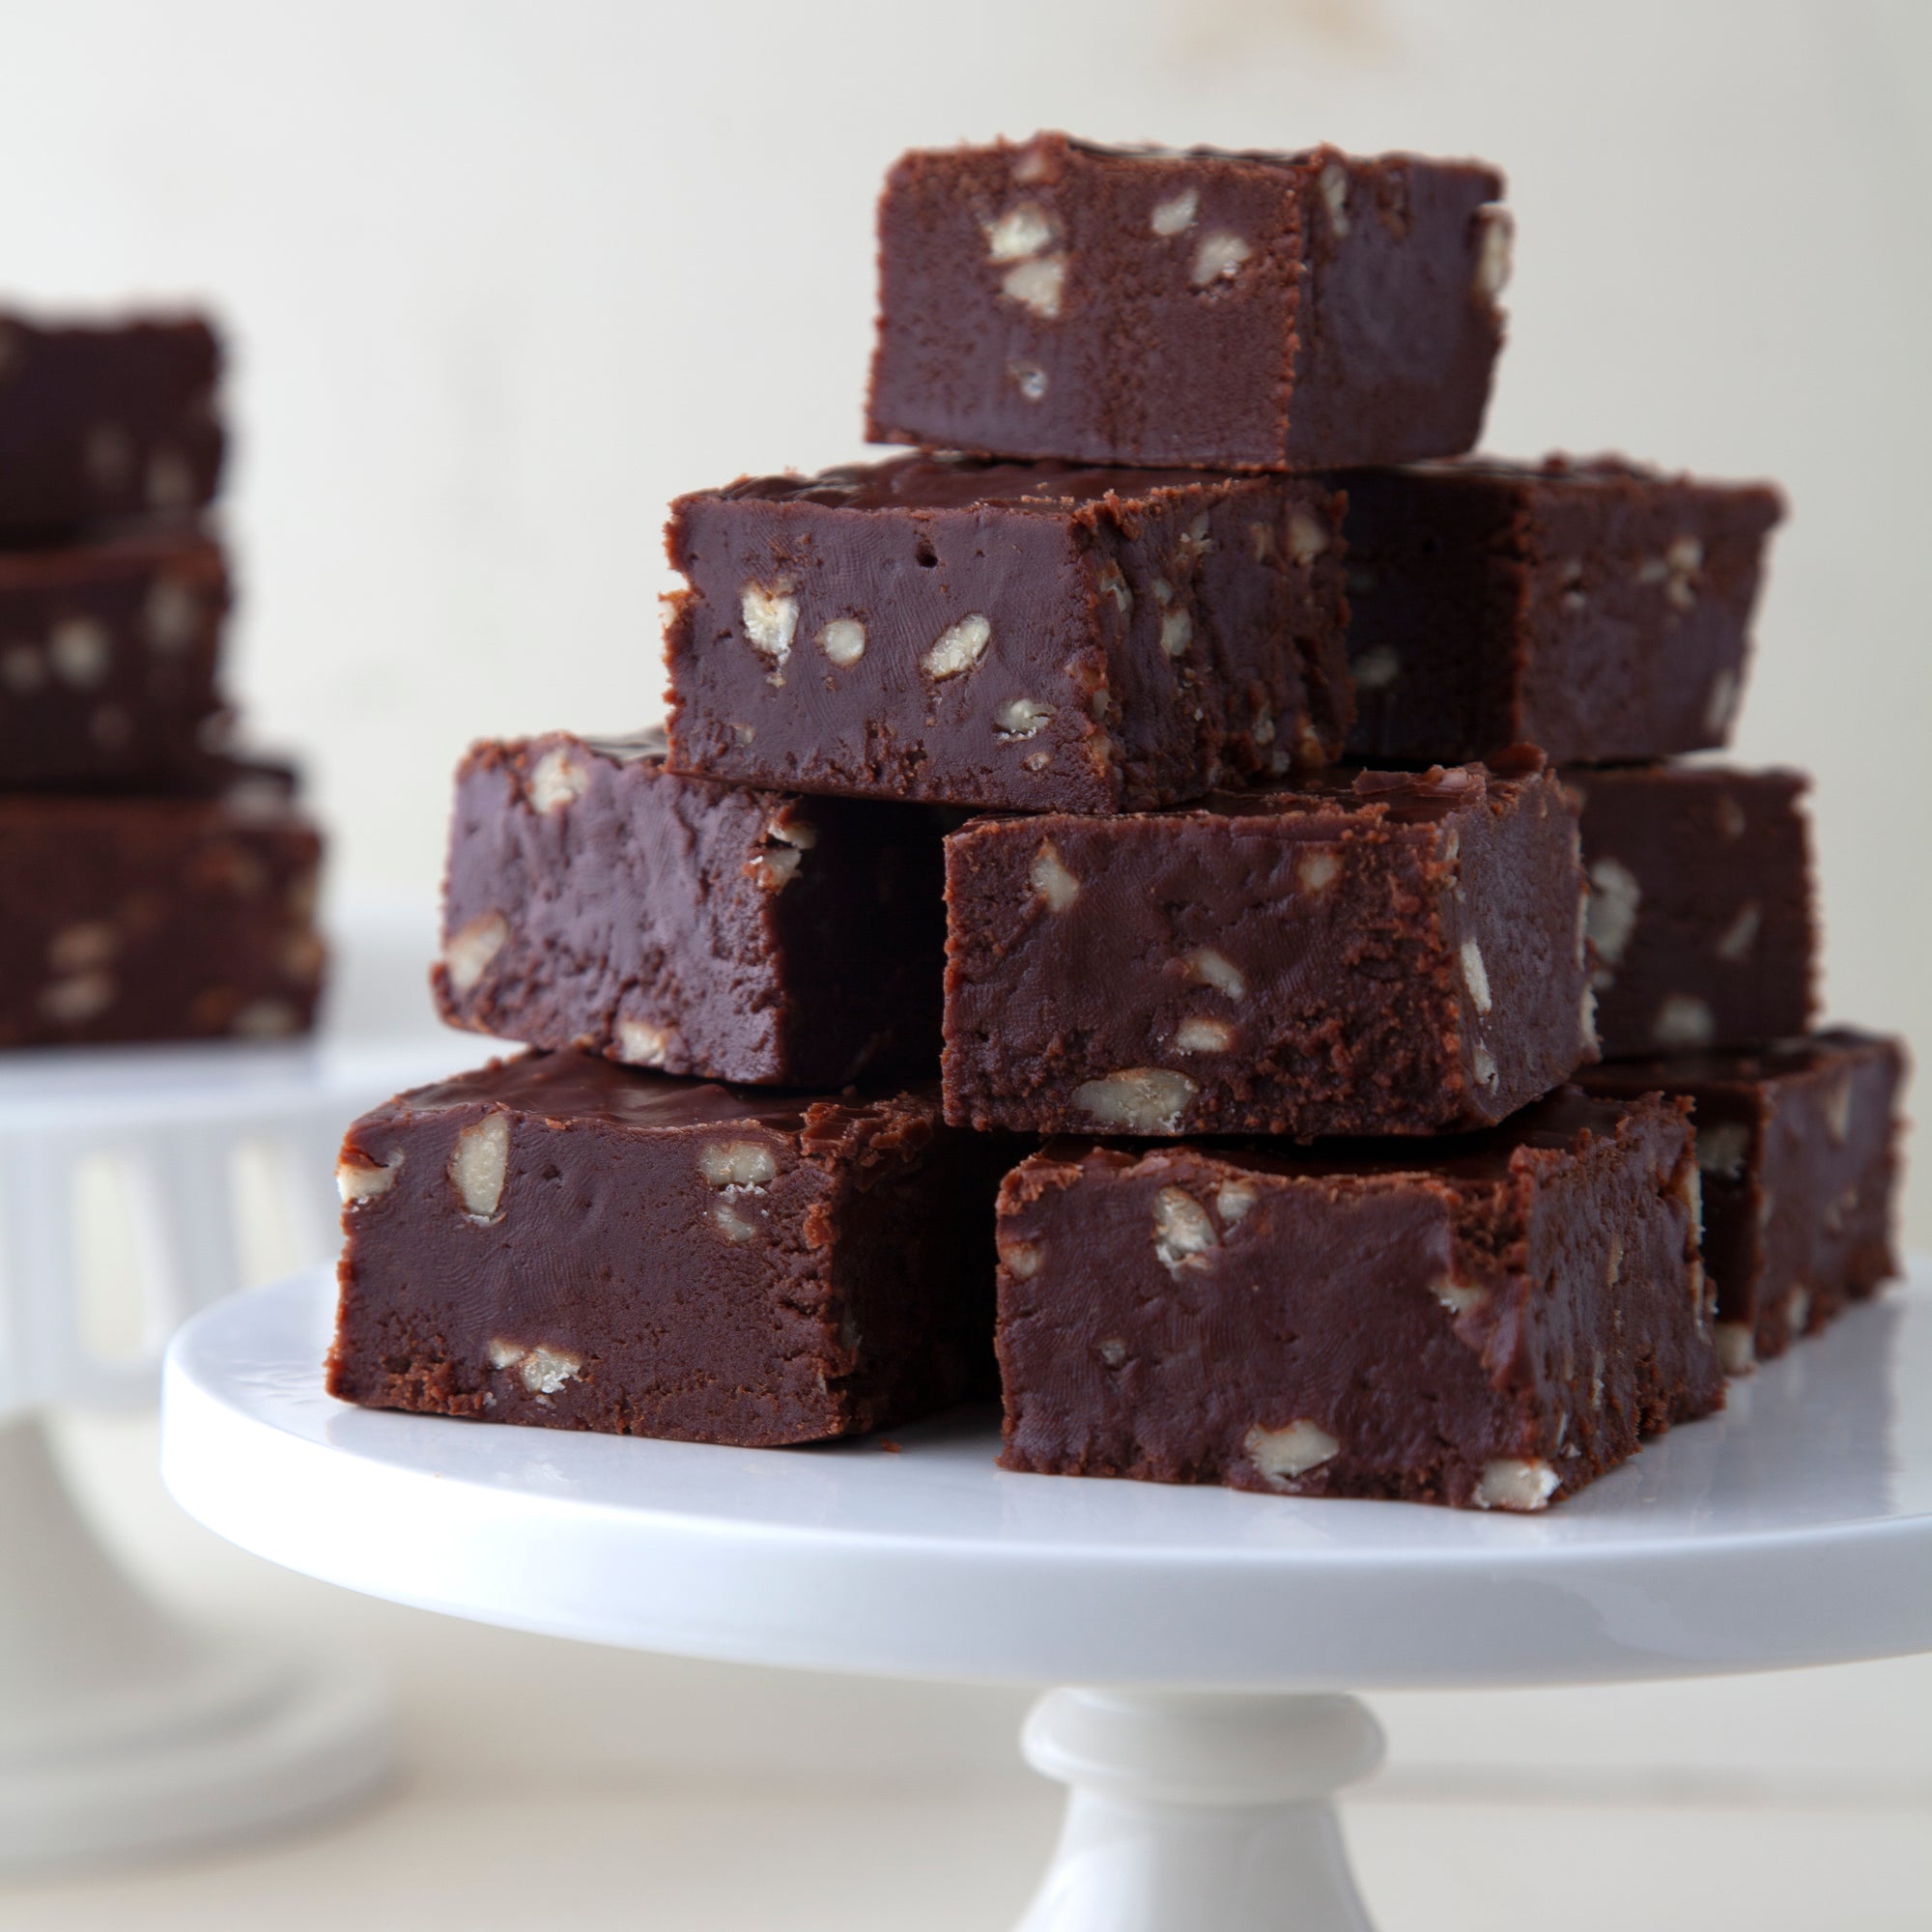 Our Chocolate Pecan Fudge is rich and smooth. The best fudge you will ever taste!